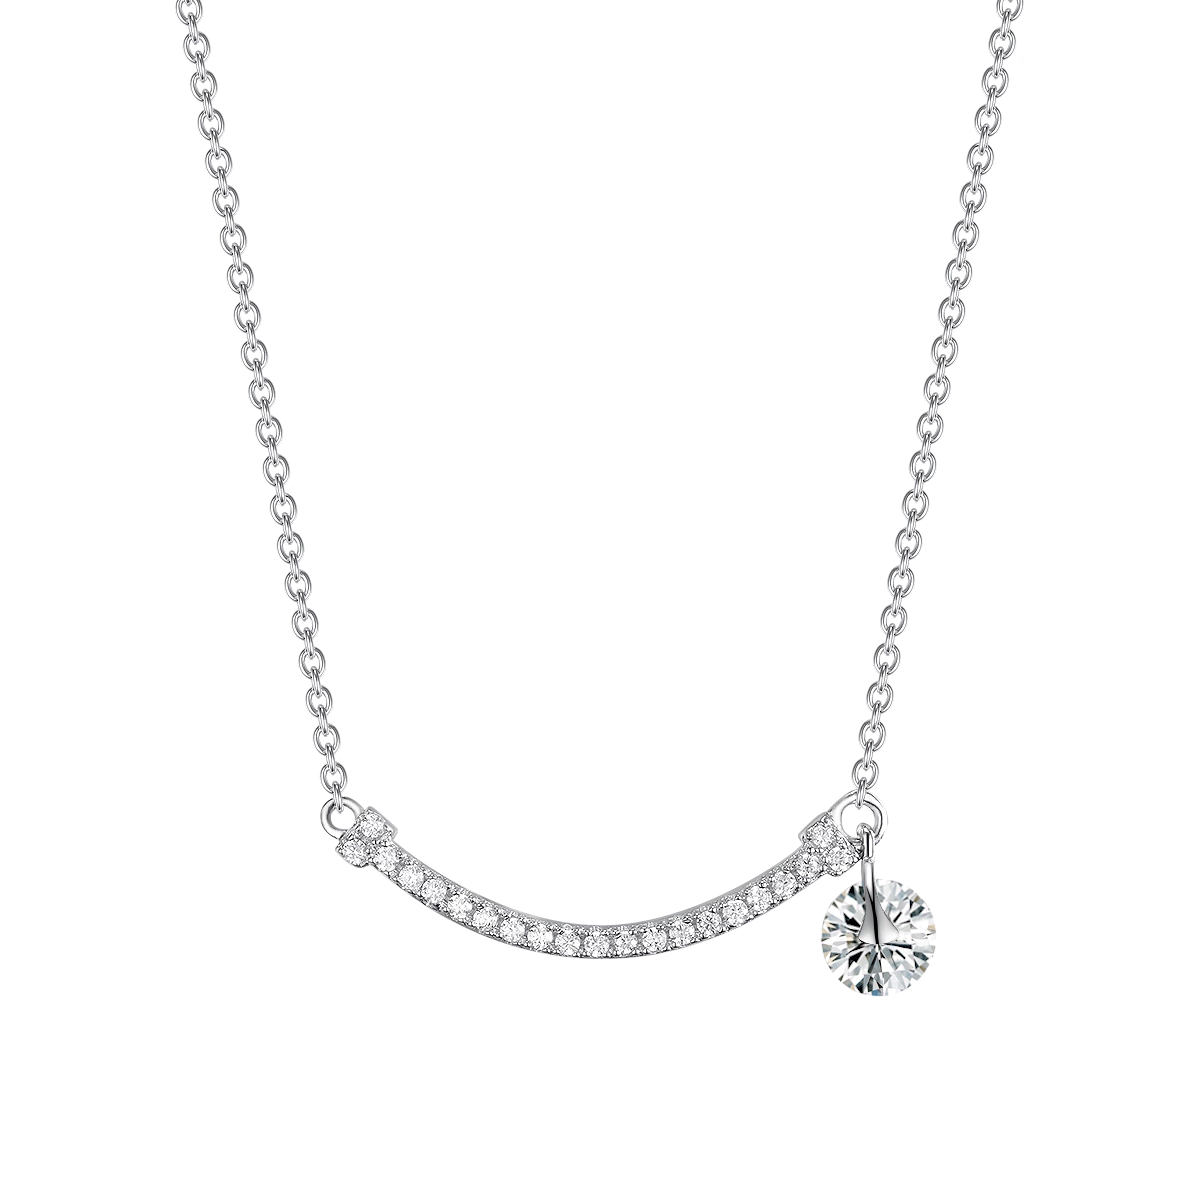 Necklaces in Sterling Silver 925 for Women